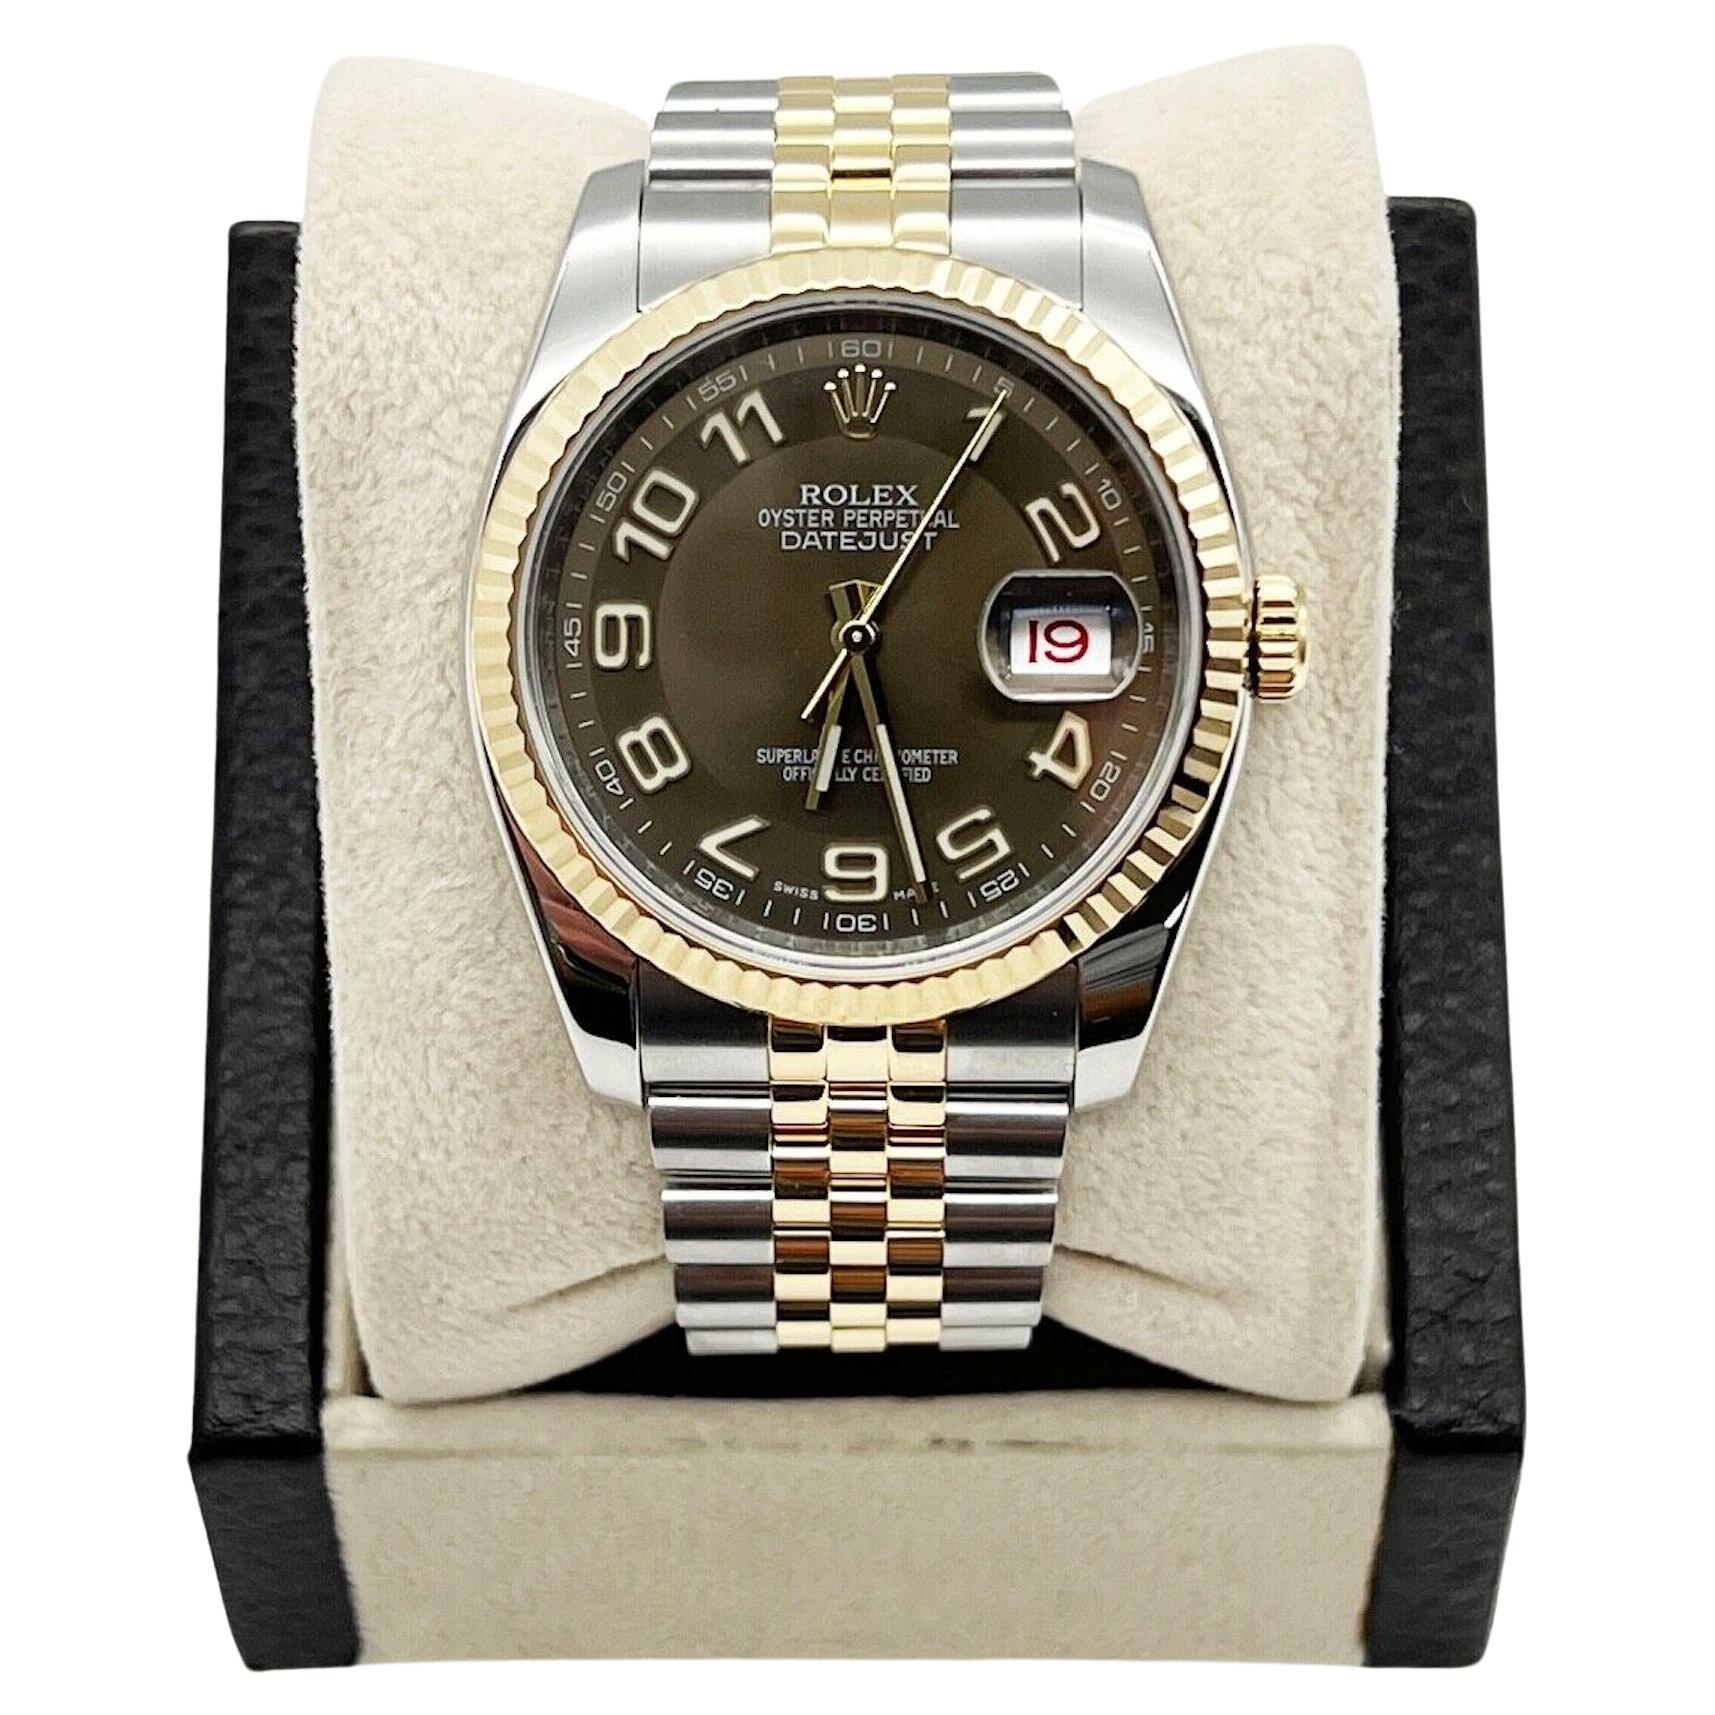 Rolex Datejust 116233 Bronze Arabic Dial 18K Gold Stainless Steel Box Paper For Sale